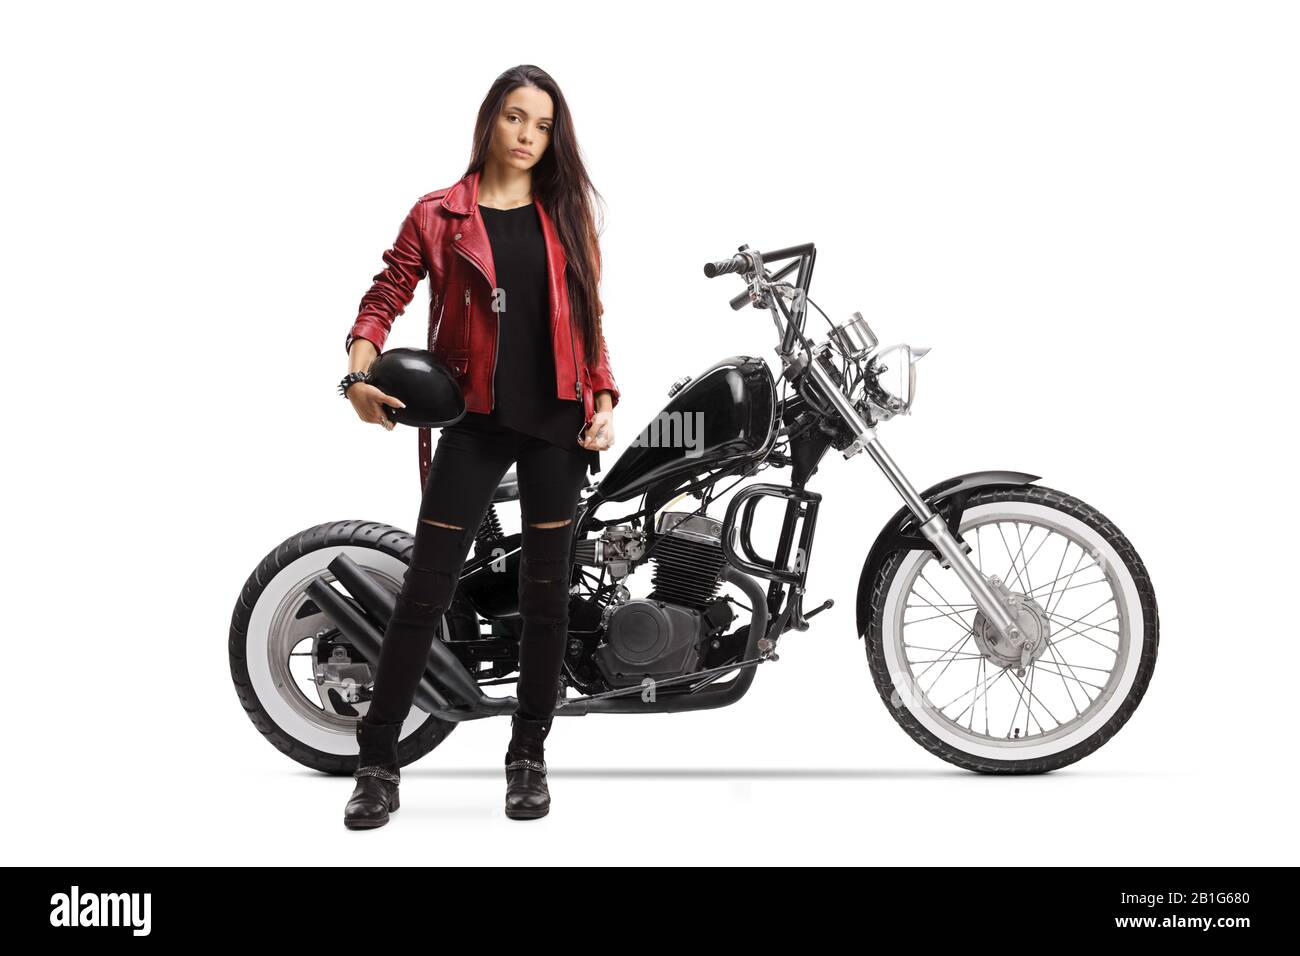 Full length portrait of a young woman holding a helmet and standing next to a custom motorcycle isolated on white background Stock Photo